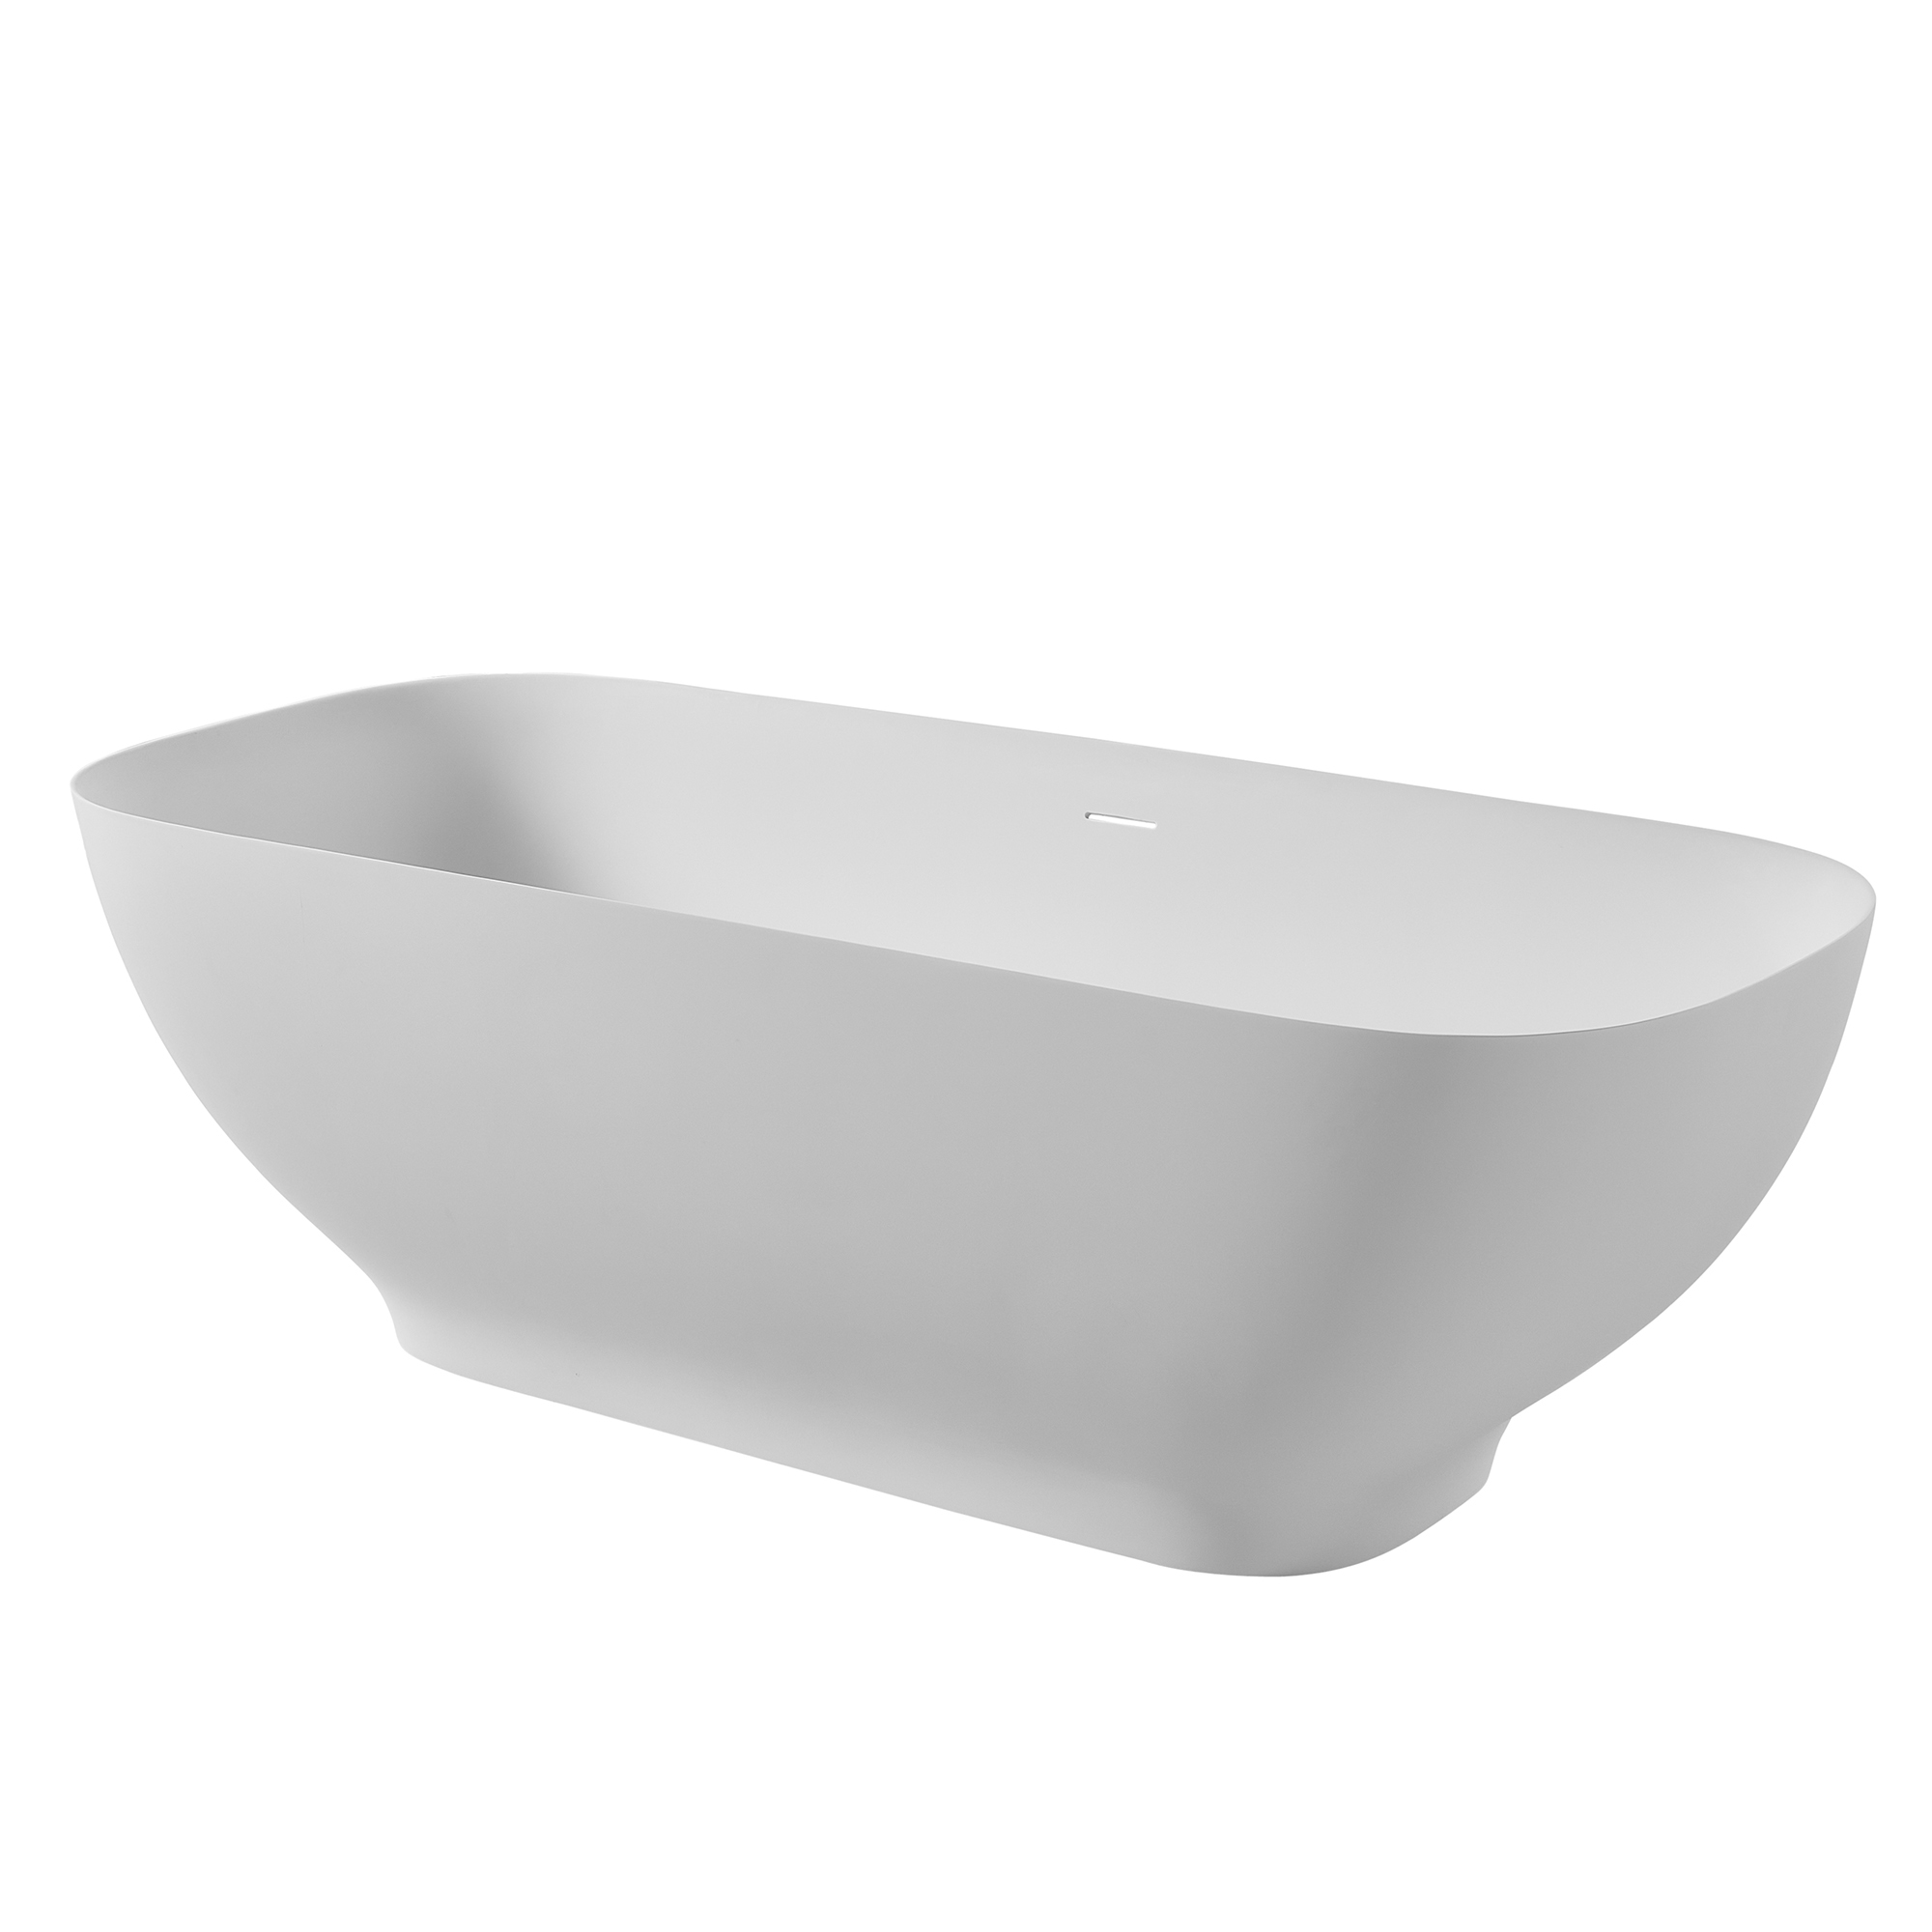 Elevate Your Dreams with Our 63"/67" Freestanding Tub, Rectangular Shapes Resin Bathtubs with Overflow and Center Drain, Matte White Color: Simple, Elegant, and Available in Various Sizes